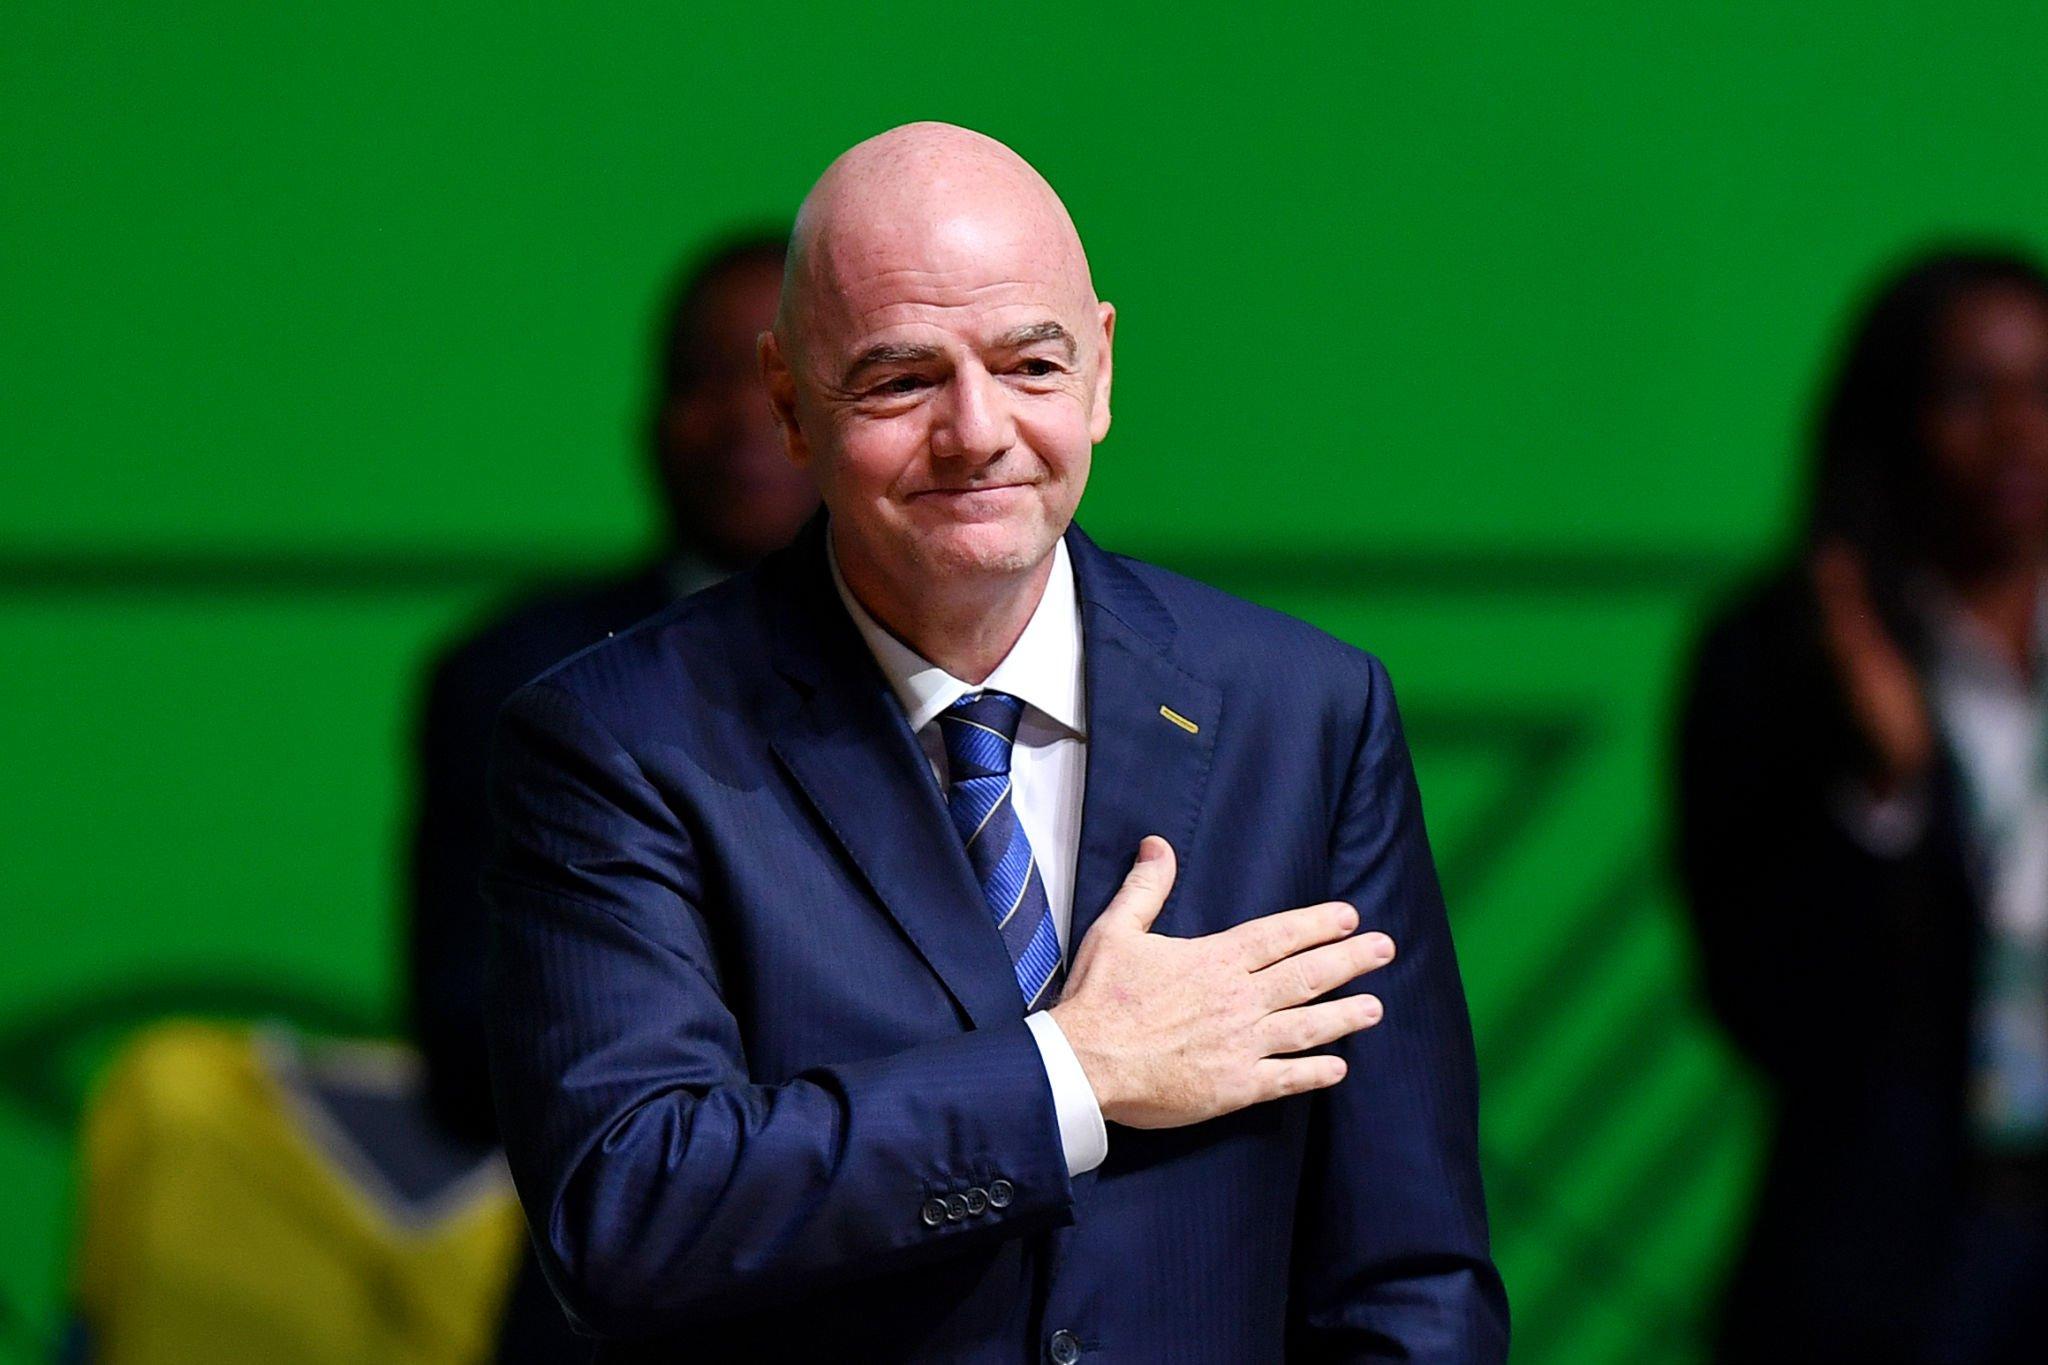 Infantino re-elected FIFA president for four-year term, Football